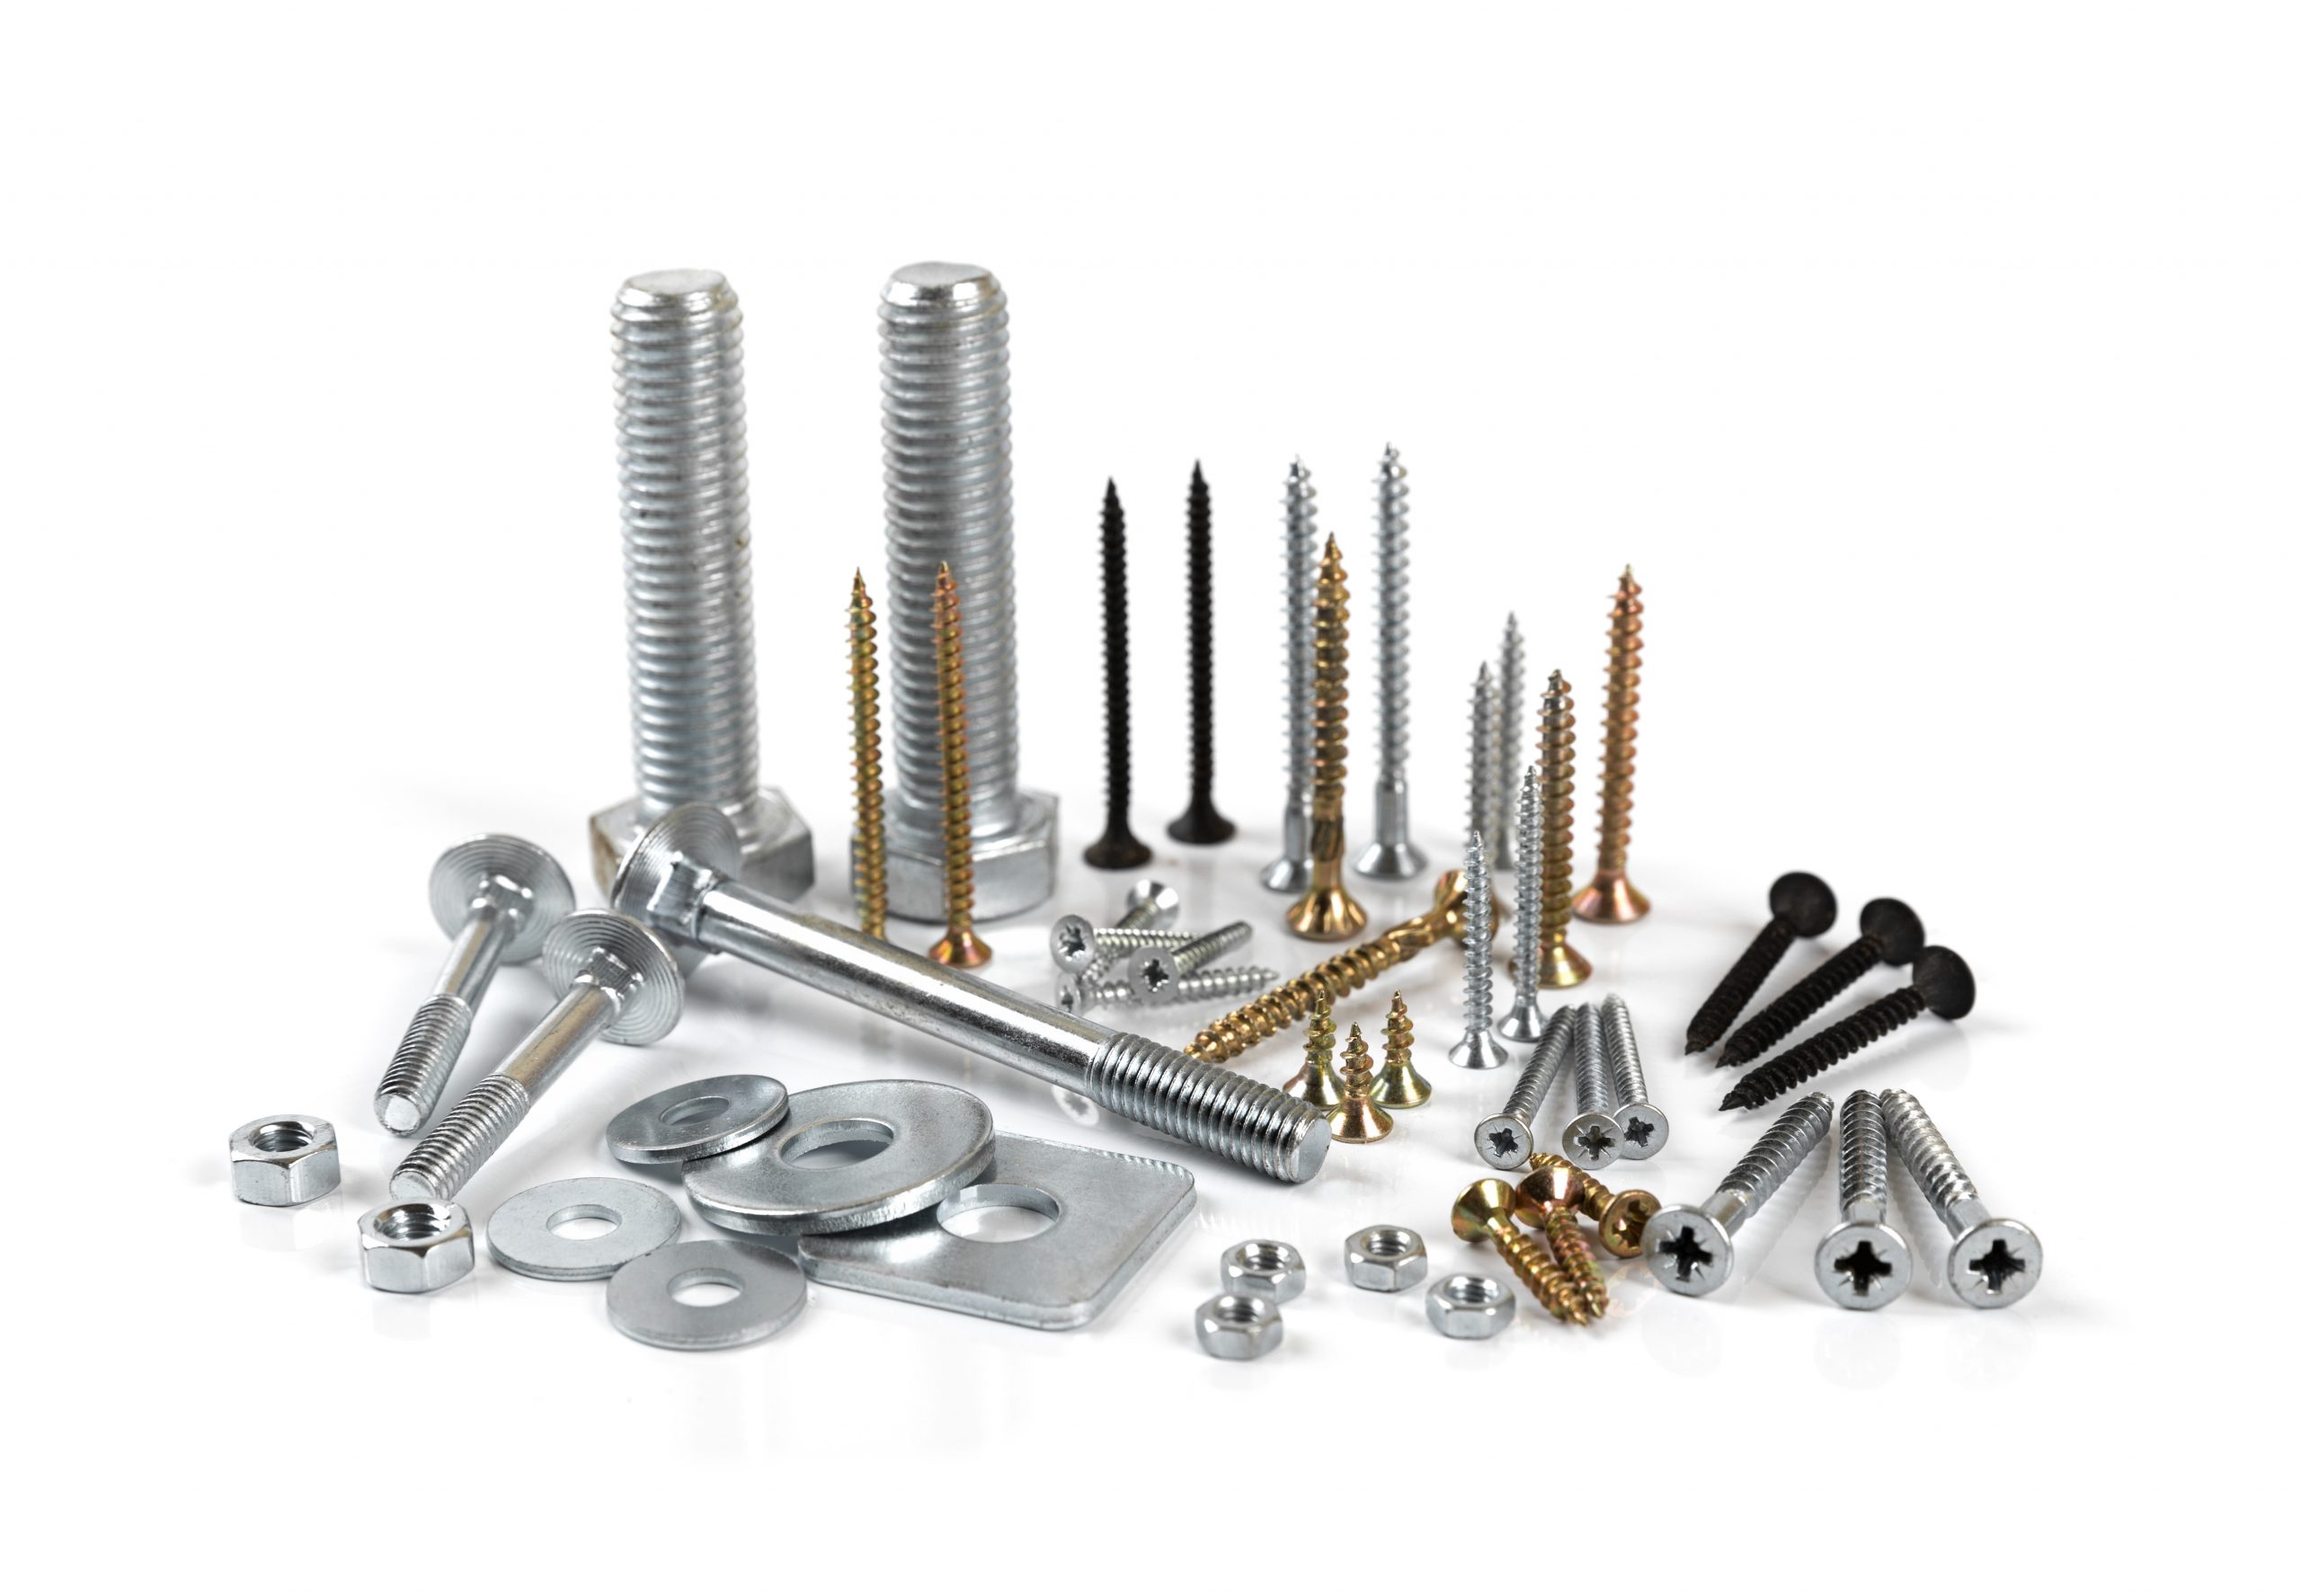 Fastener Supply in Minnesota to Keep You Prepared for Any Job